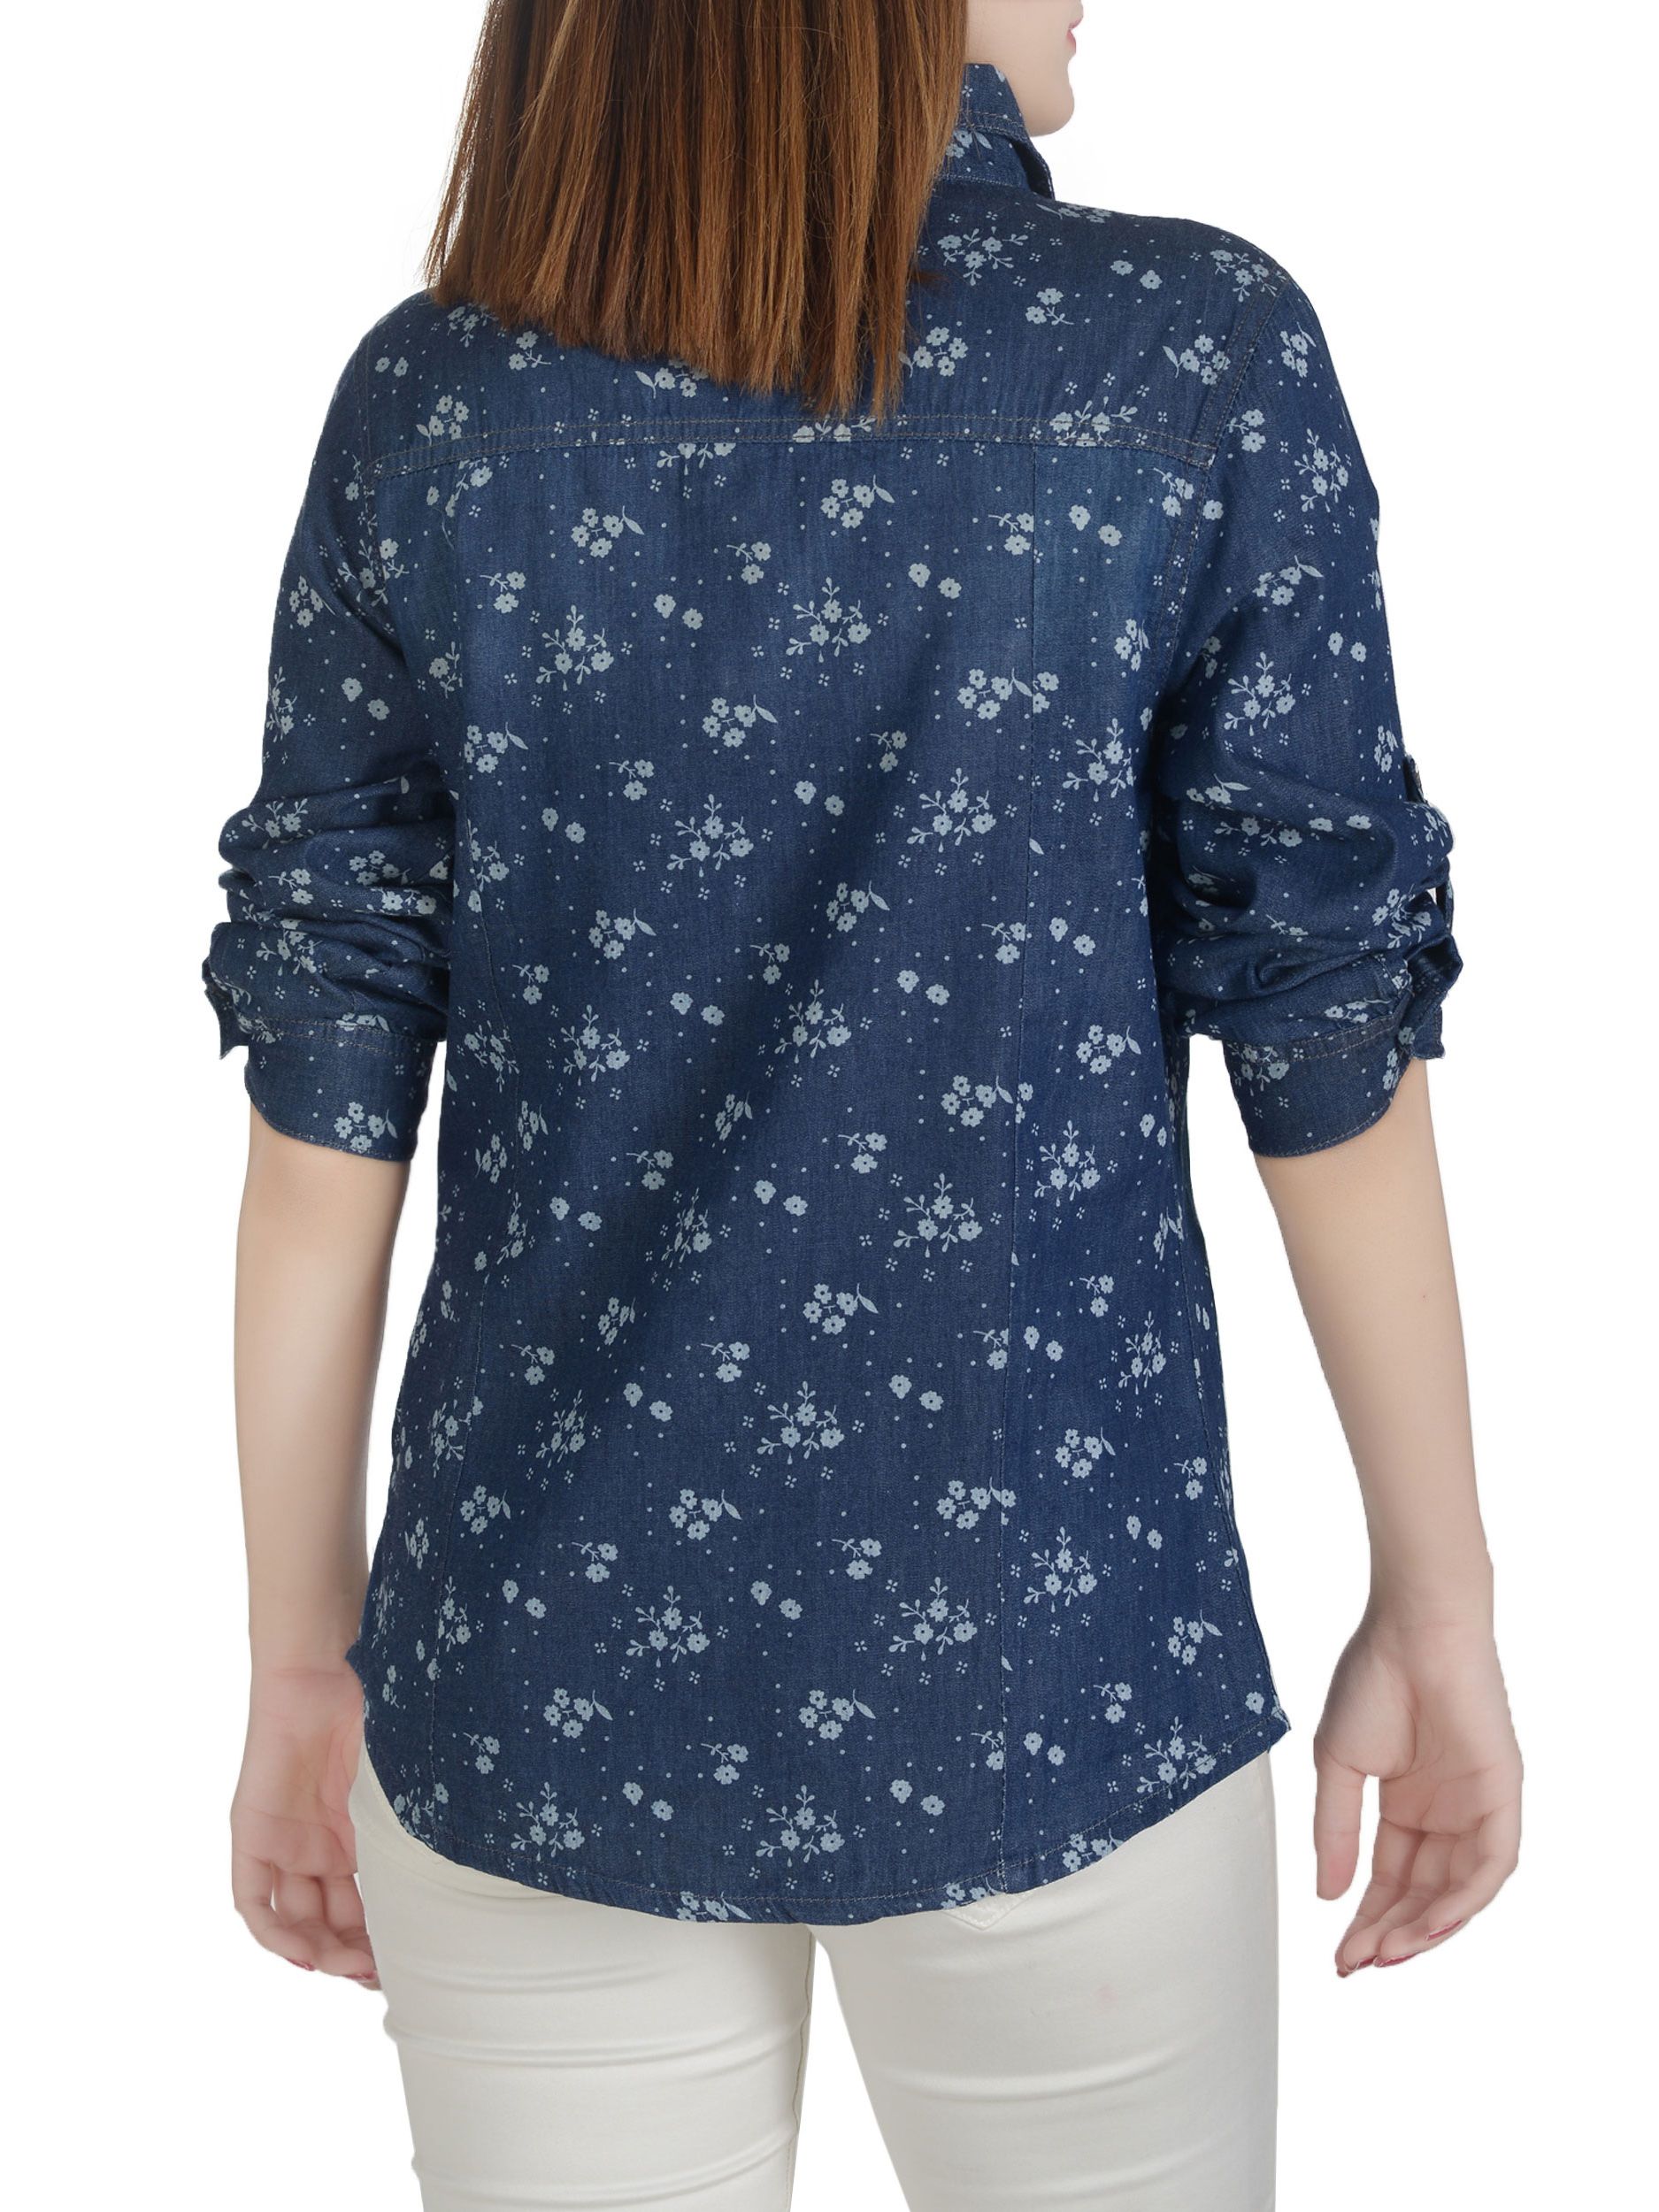 Printed denim stitched pret shirt by lime light western collection 2019